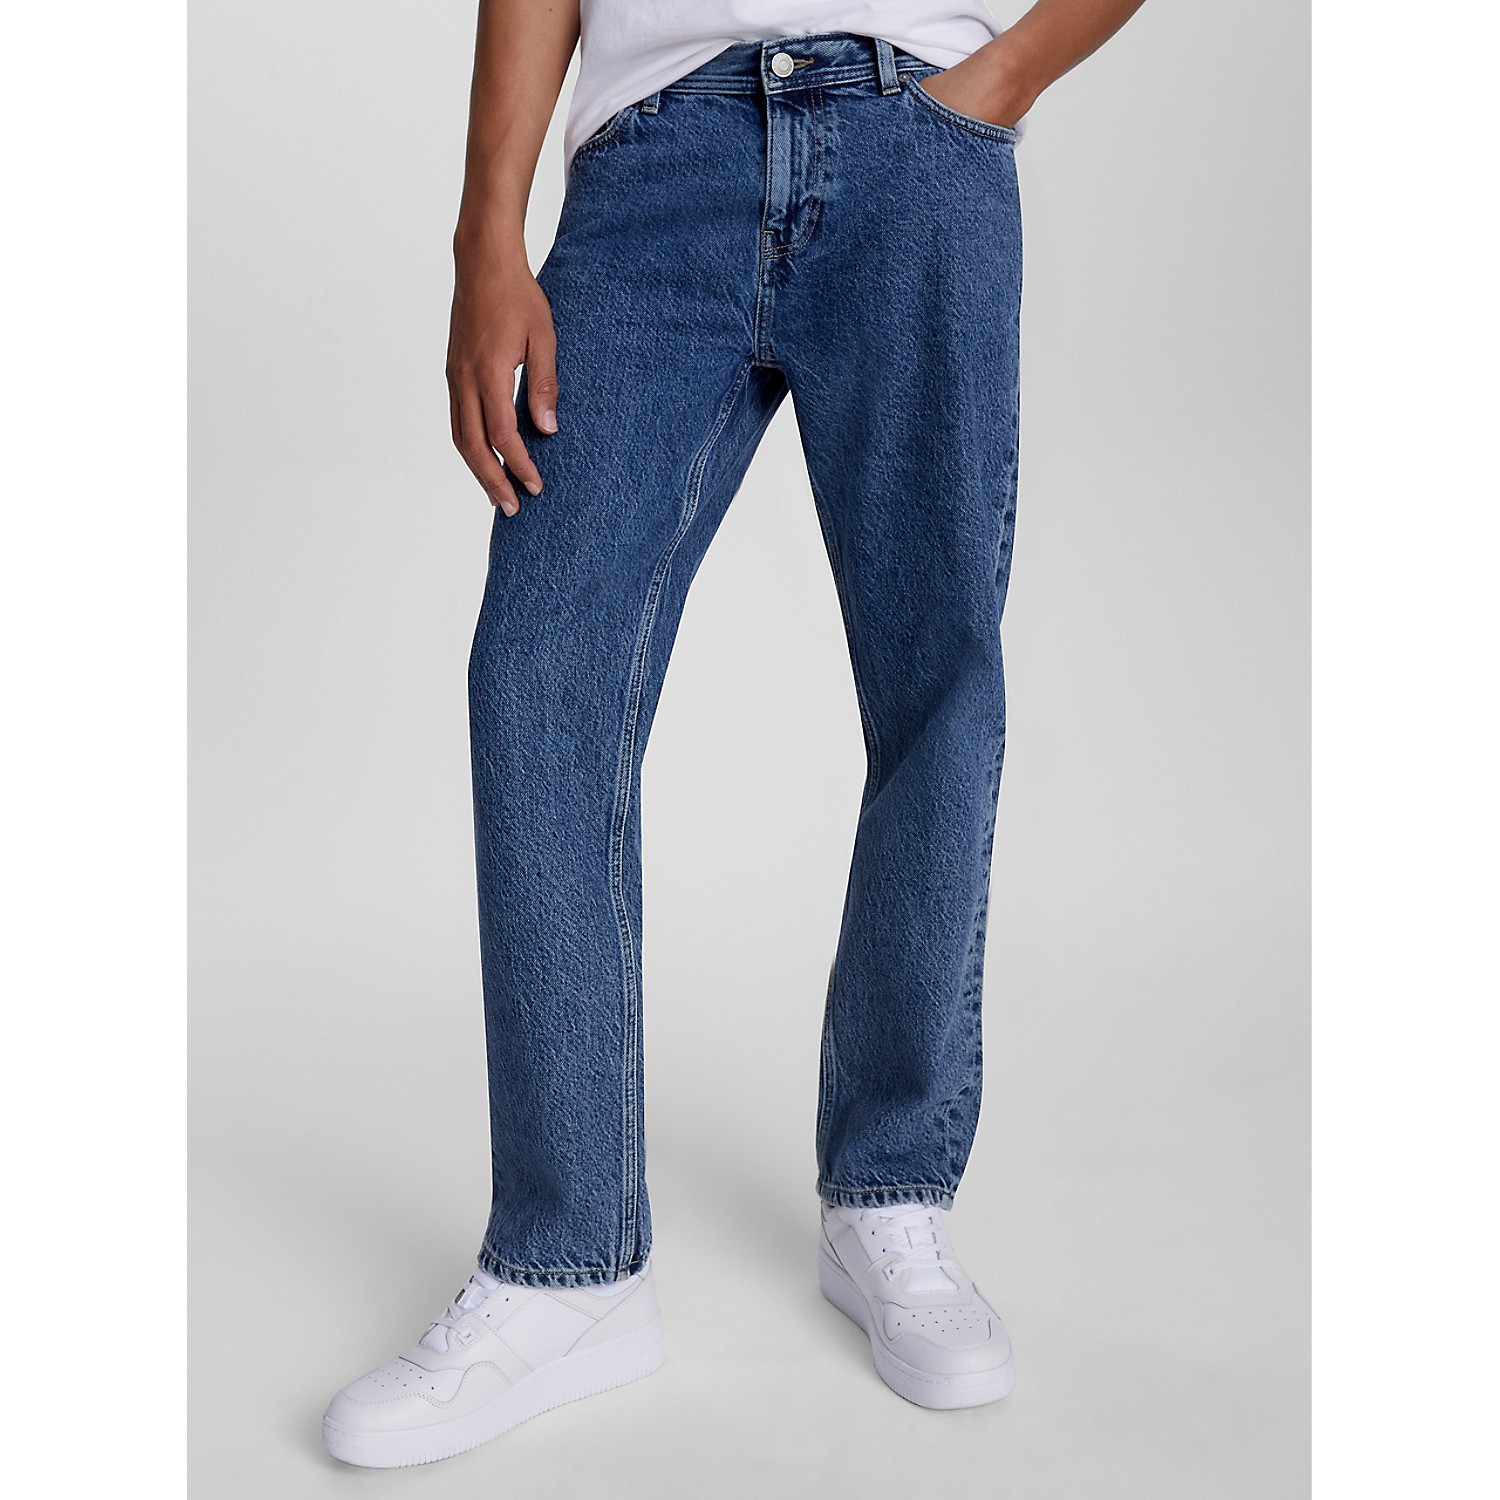 TOMMY HILFIGER Relaxed Straight Fit Medium Wash Jean